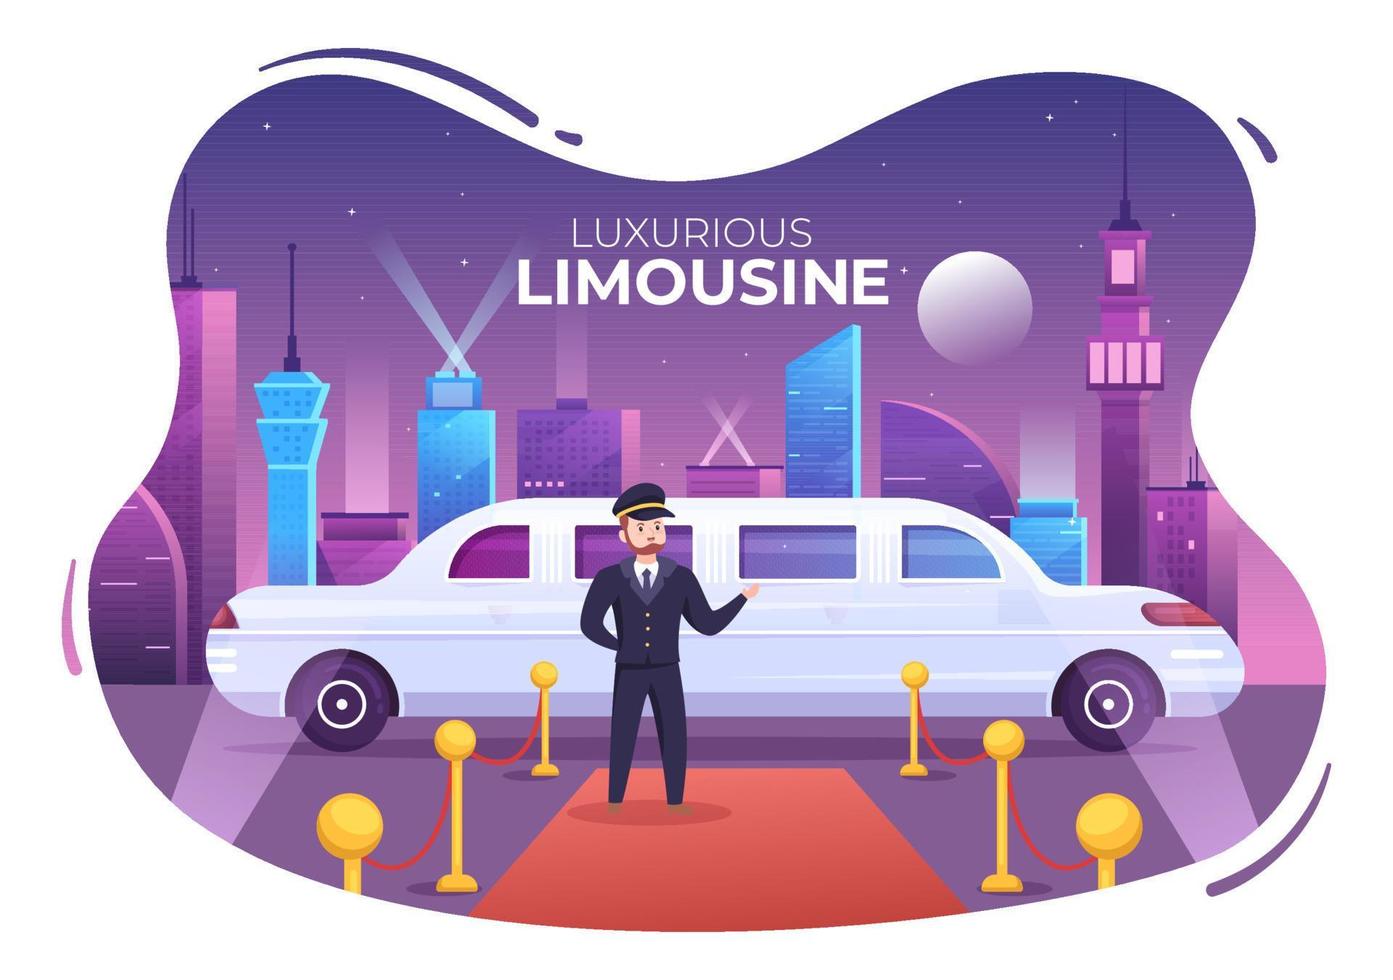 VIP Limousine Car of Red Carpet for Celebrity Superstar Walk with Night City Landscape View in Flat Cartoon Illustration vector